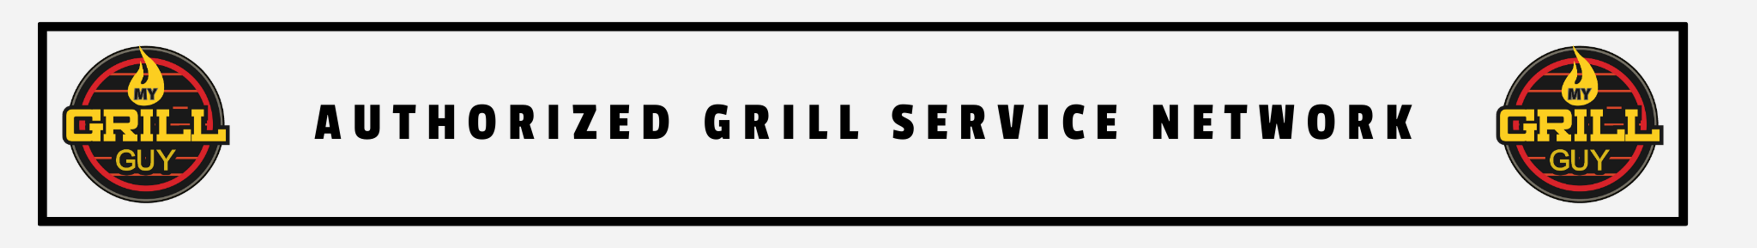 My Grill Guy Grill Authorized